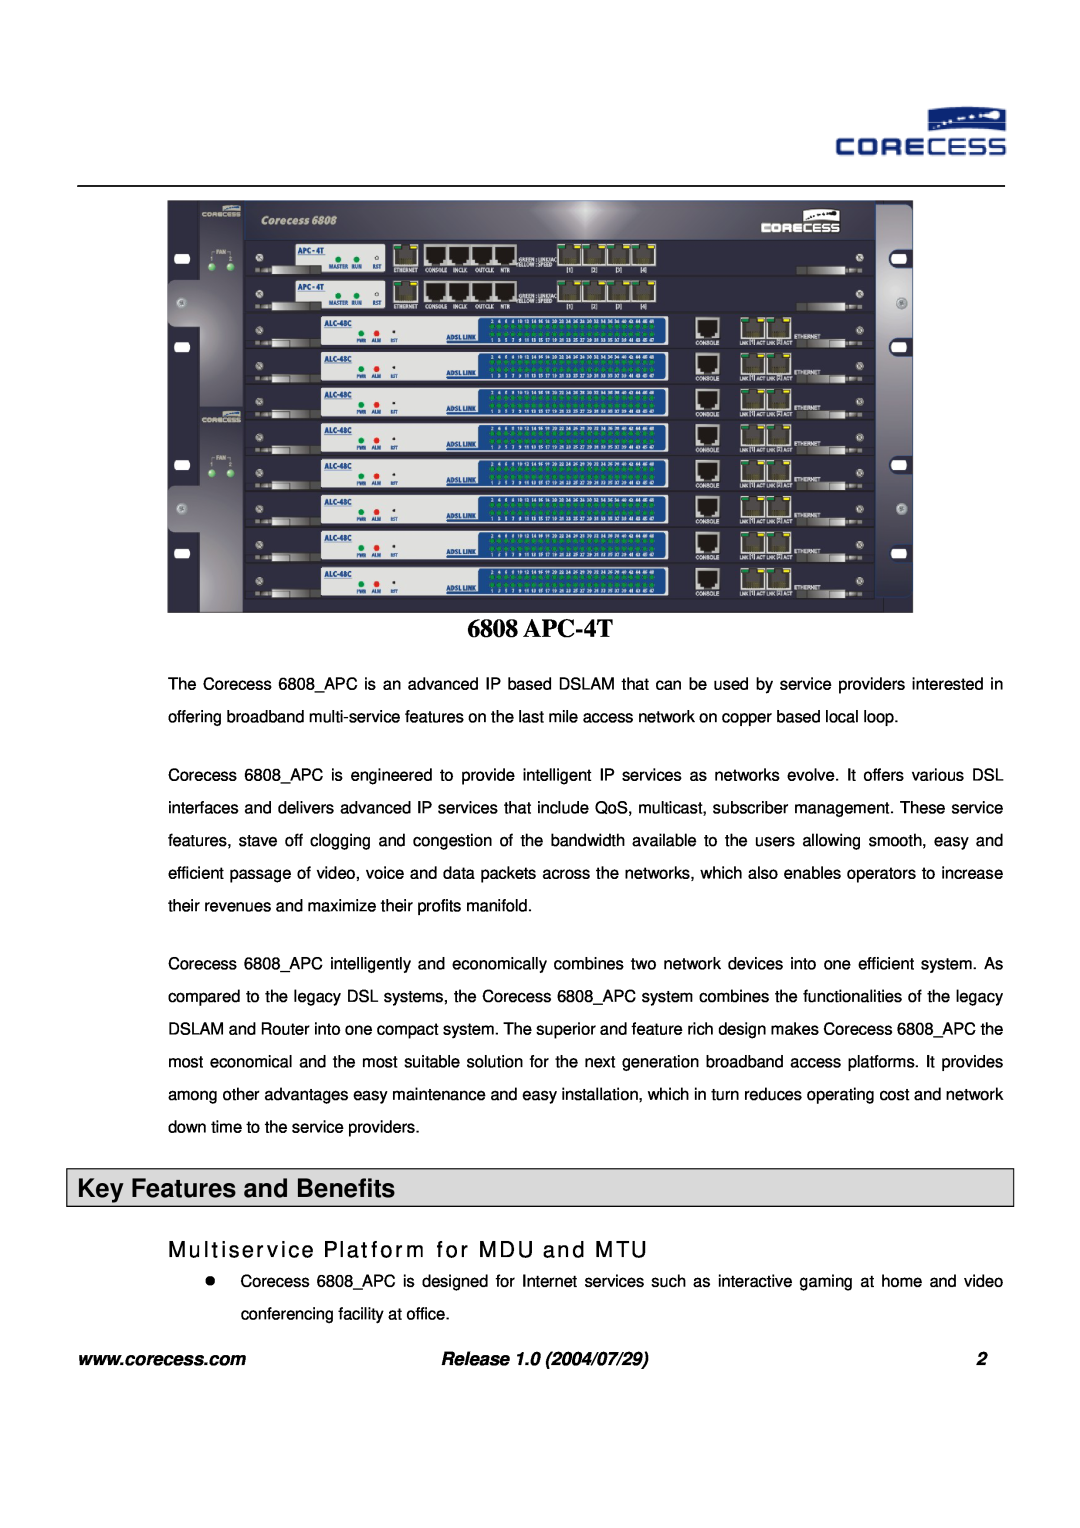 APC IP DSLAM manual APC-4T, Key Features and Benefits, Multiservice Platform for MDU and MTU, Release 1.0 2004/07/29 